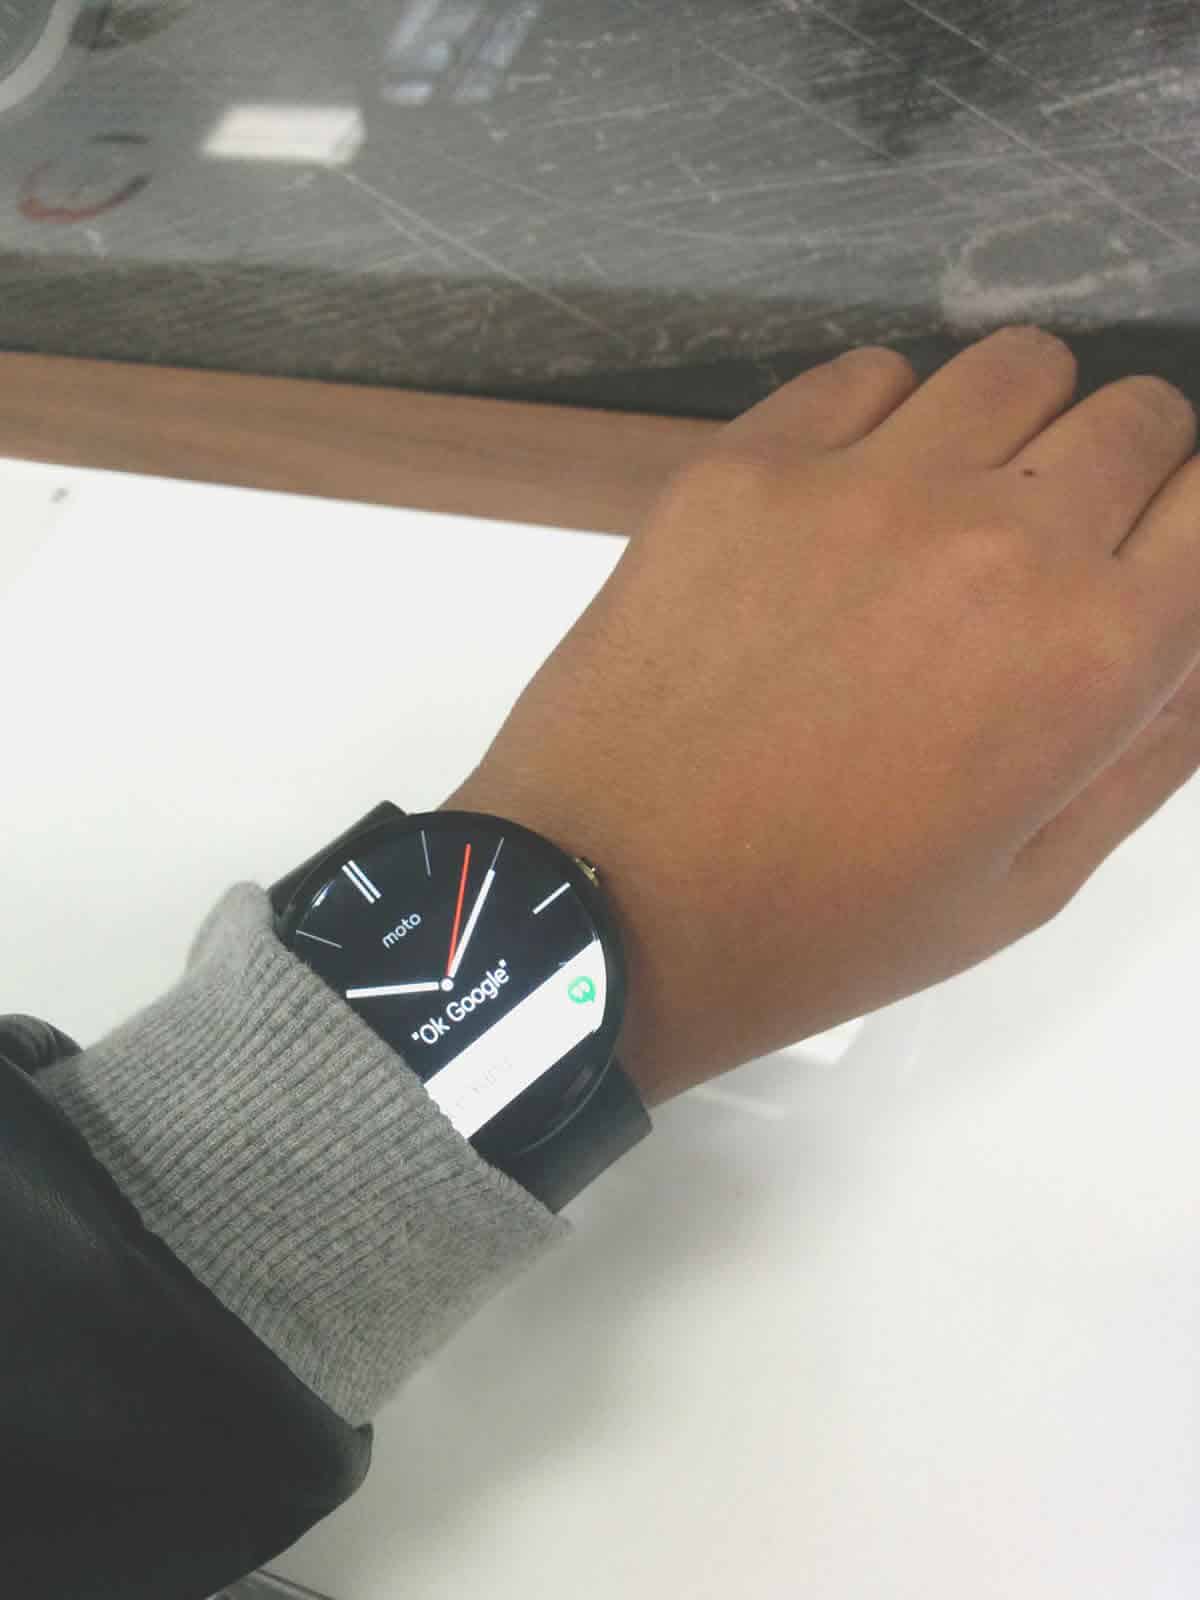 A black Moto watch displays the Android Wear mobile UI design.